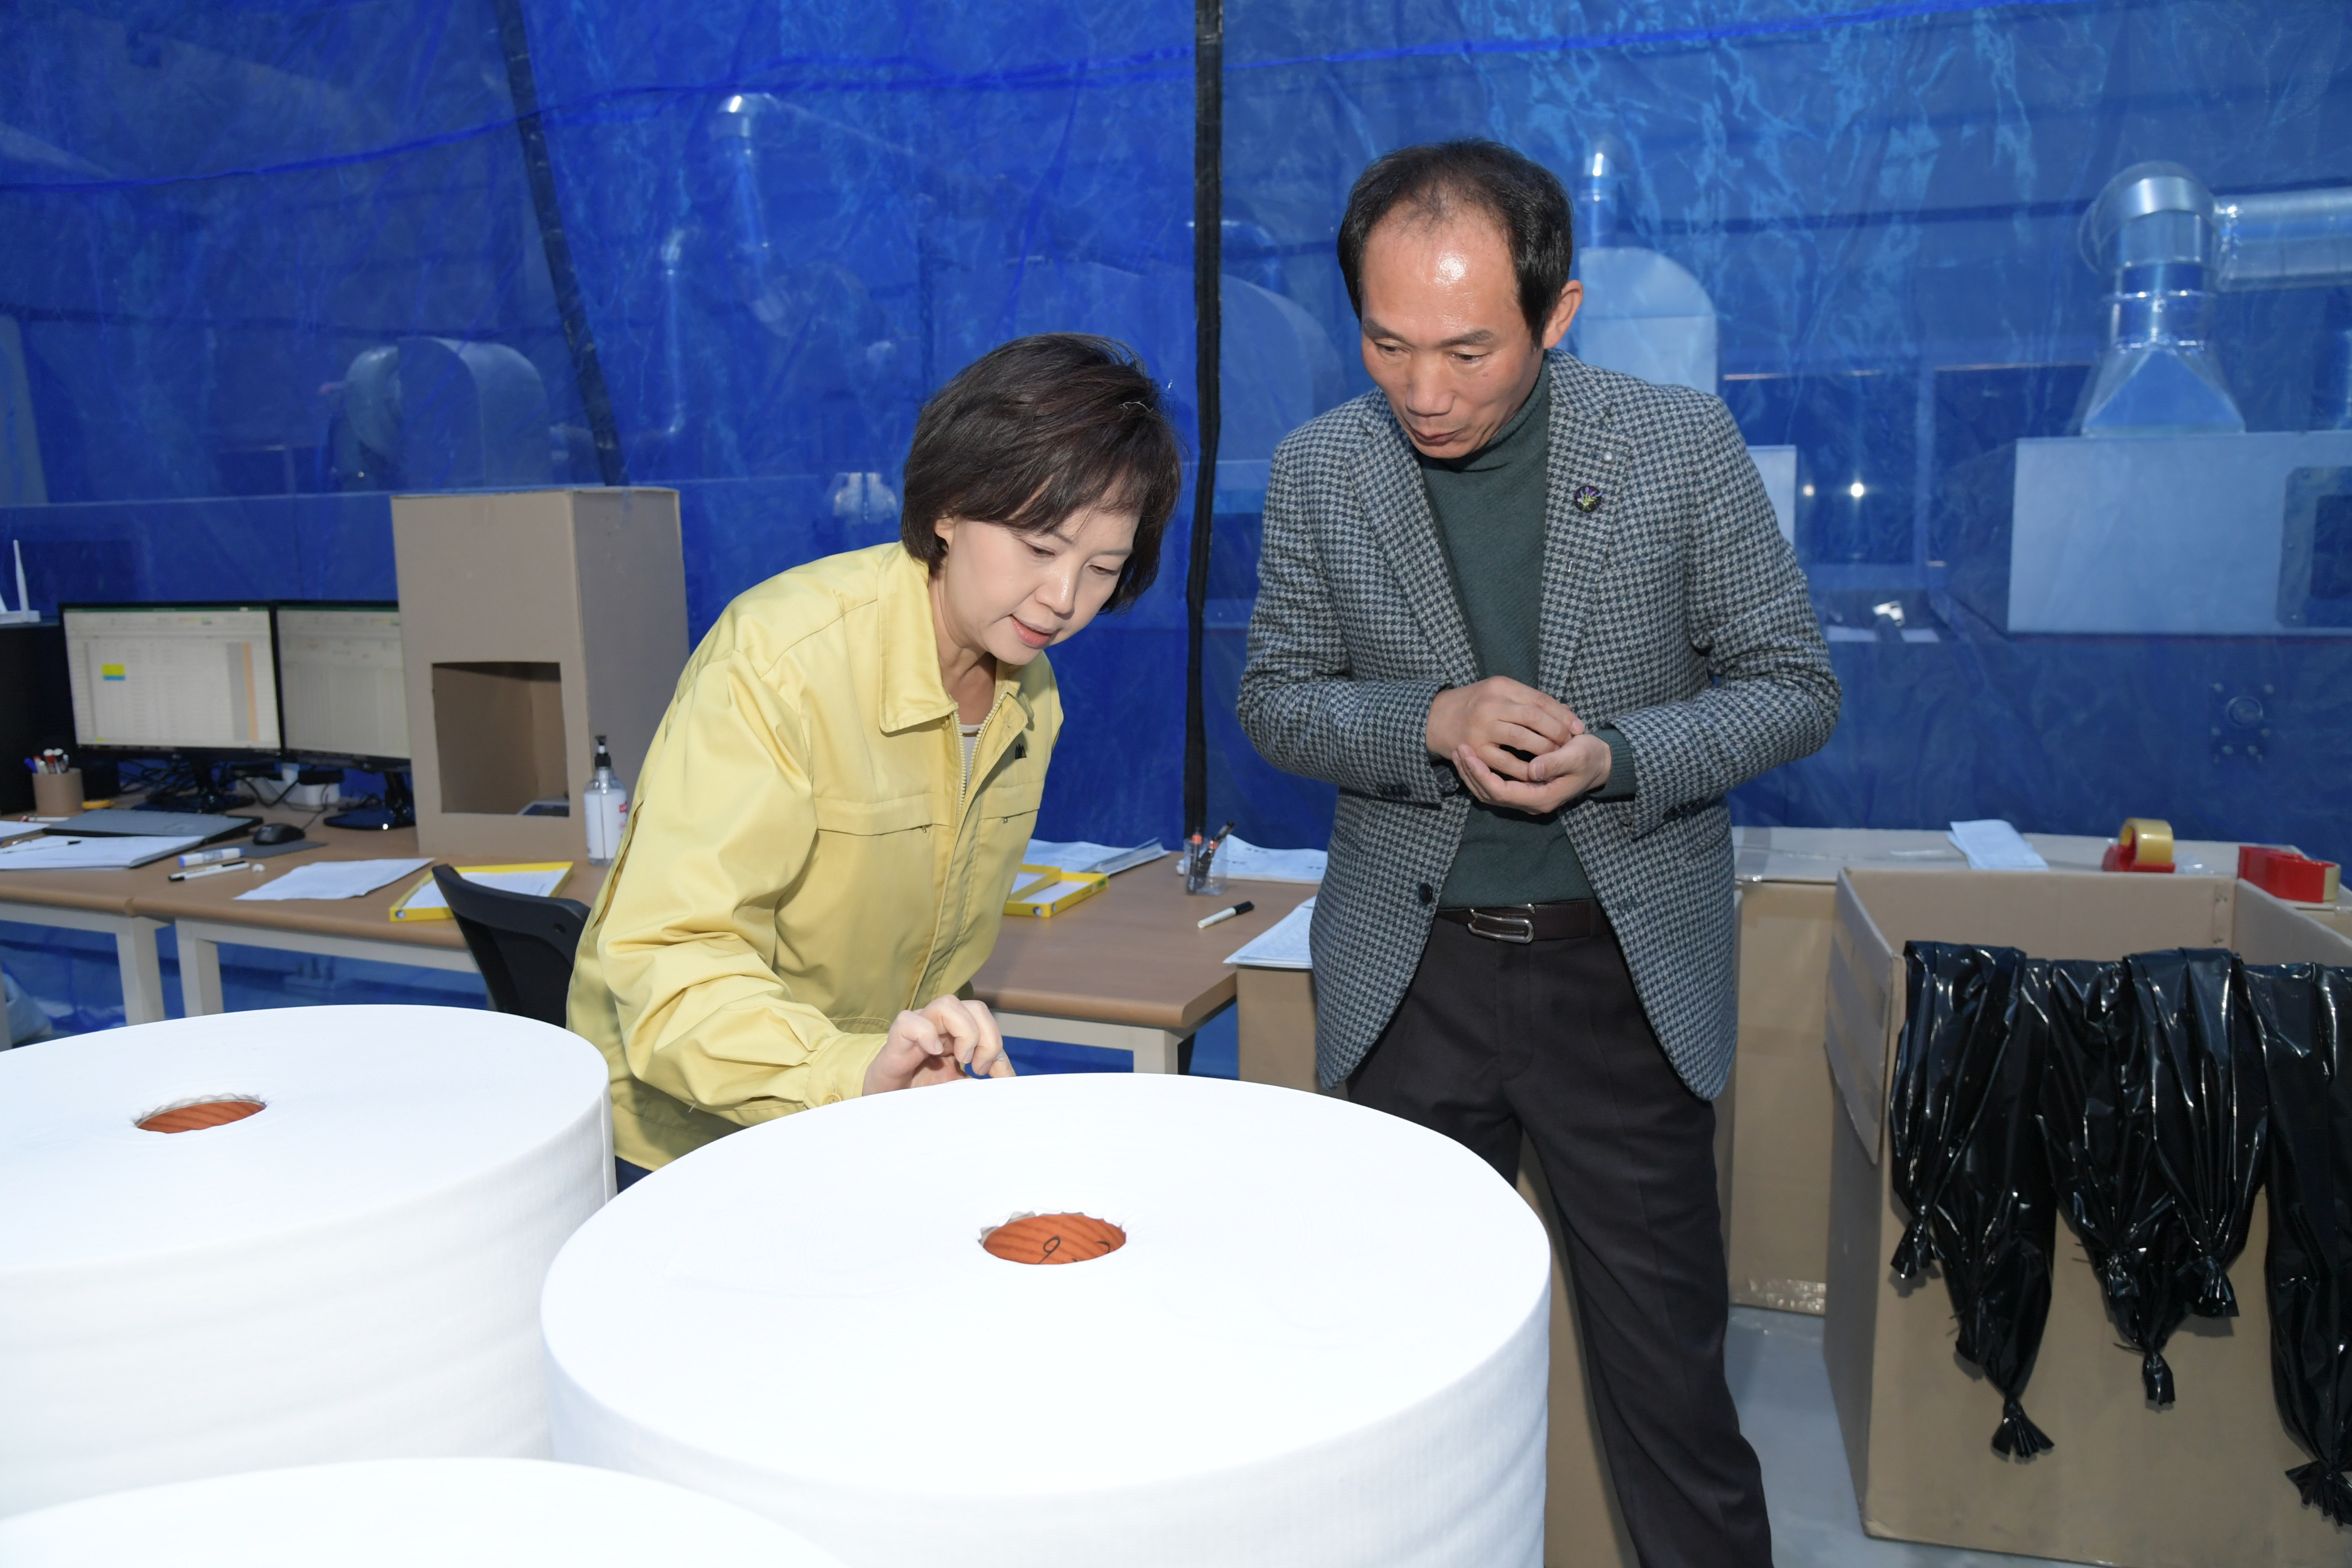 Photo News4 - [Mar. 24, 2020] Minister inspects mask-filter manufacturing site